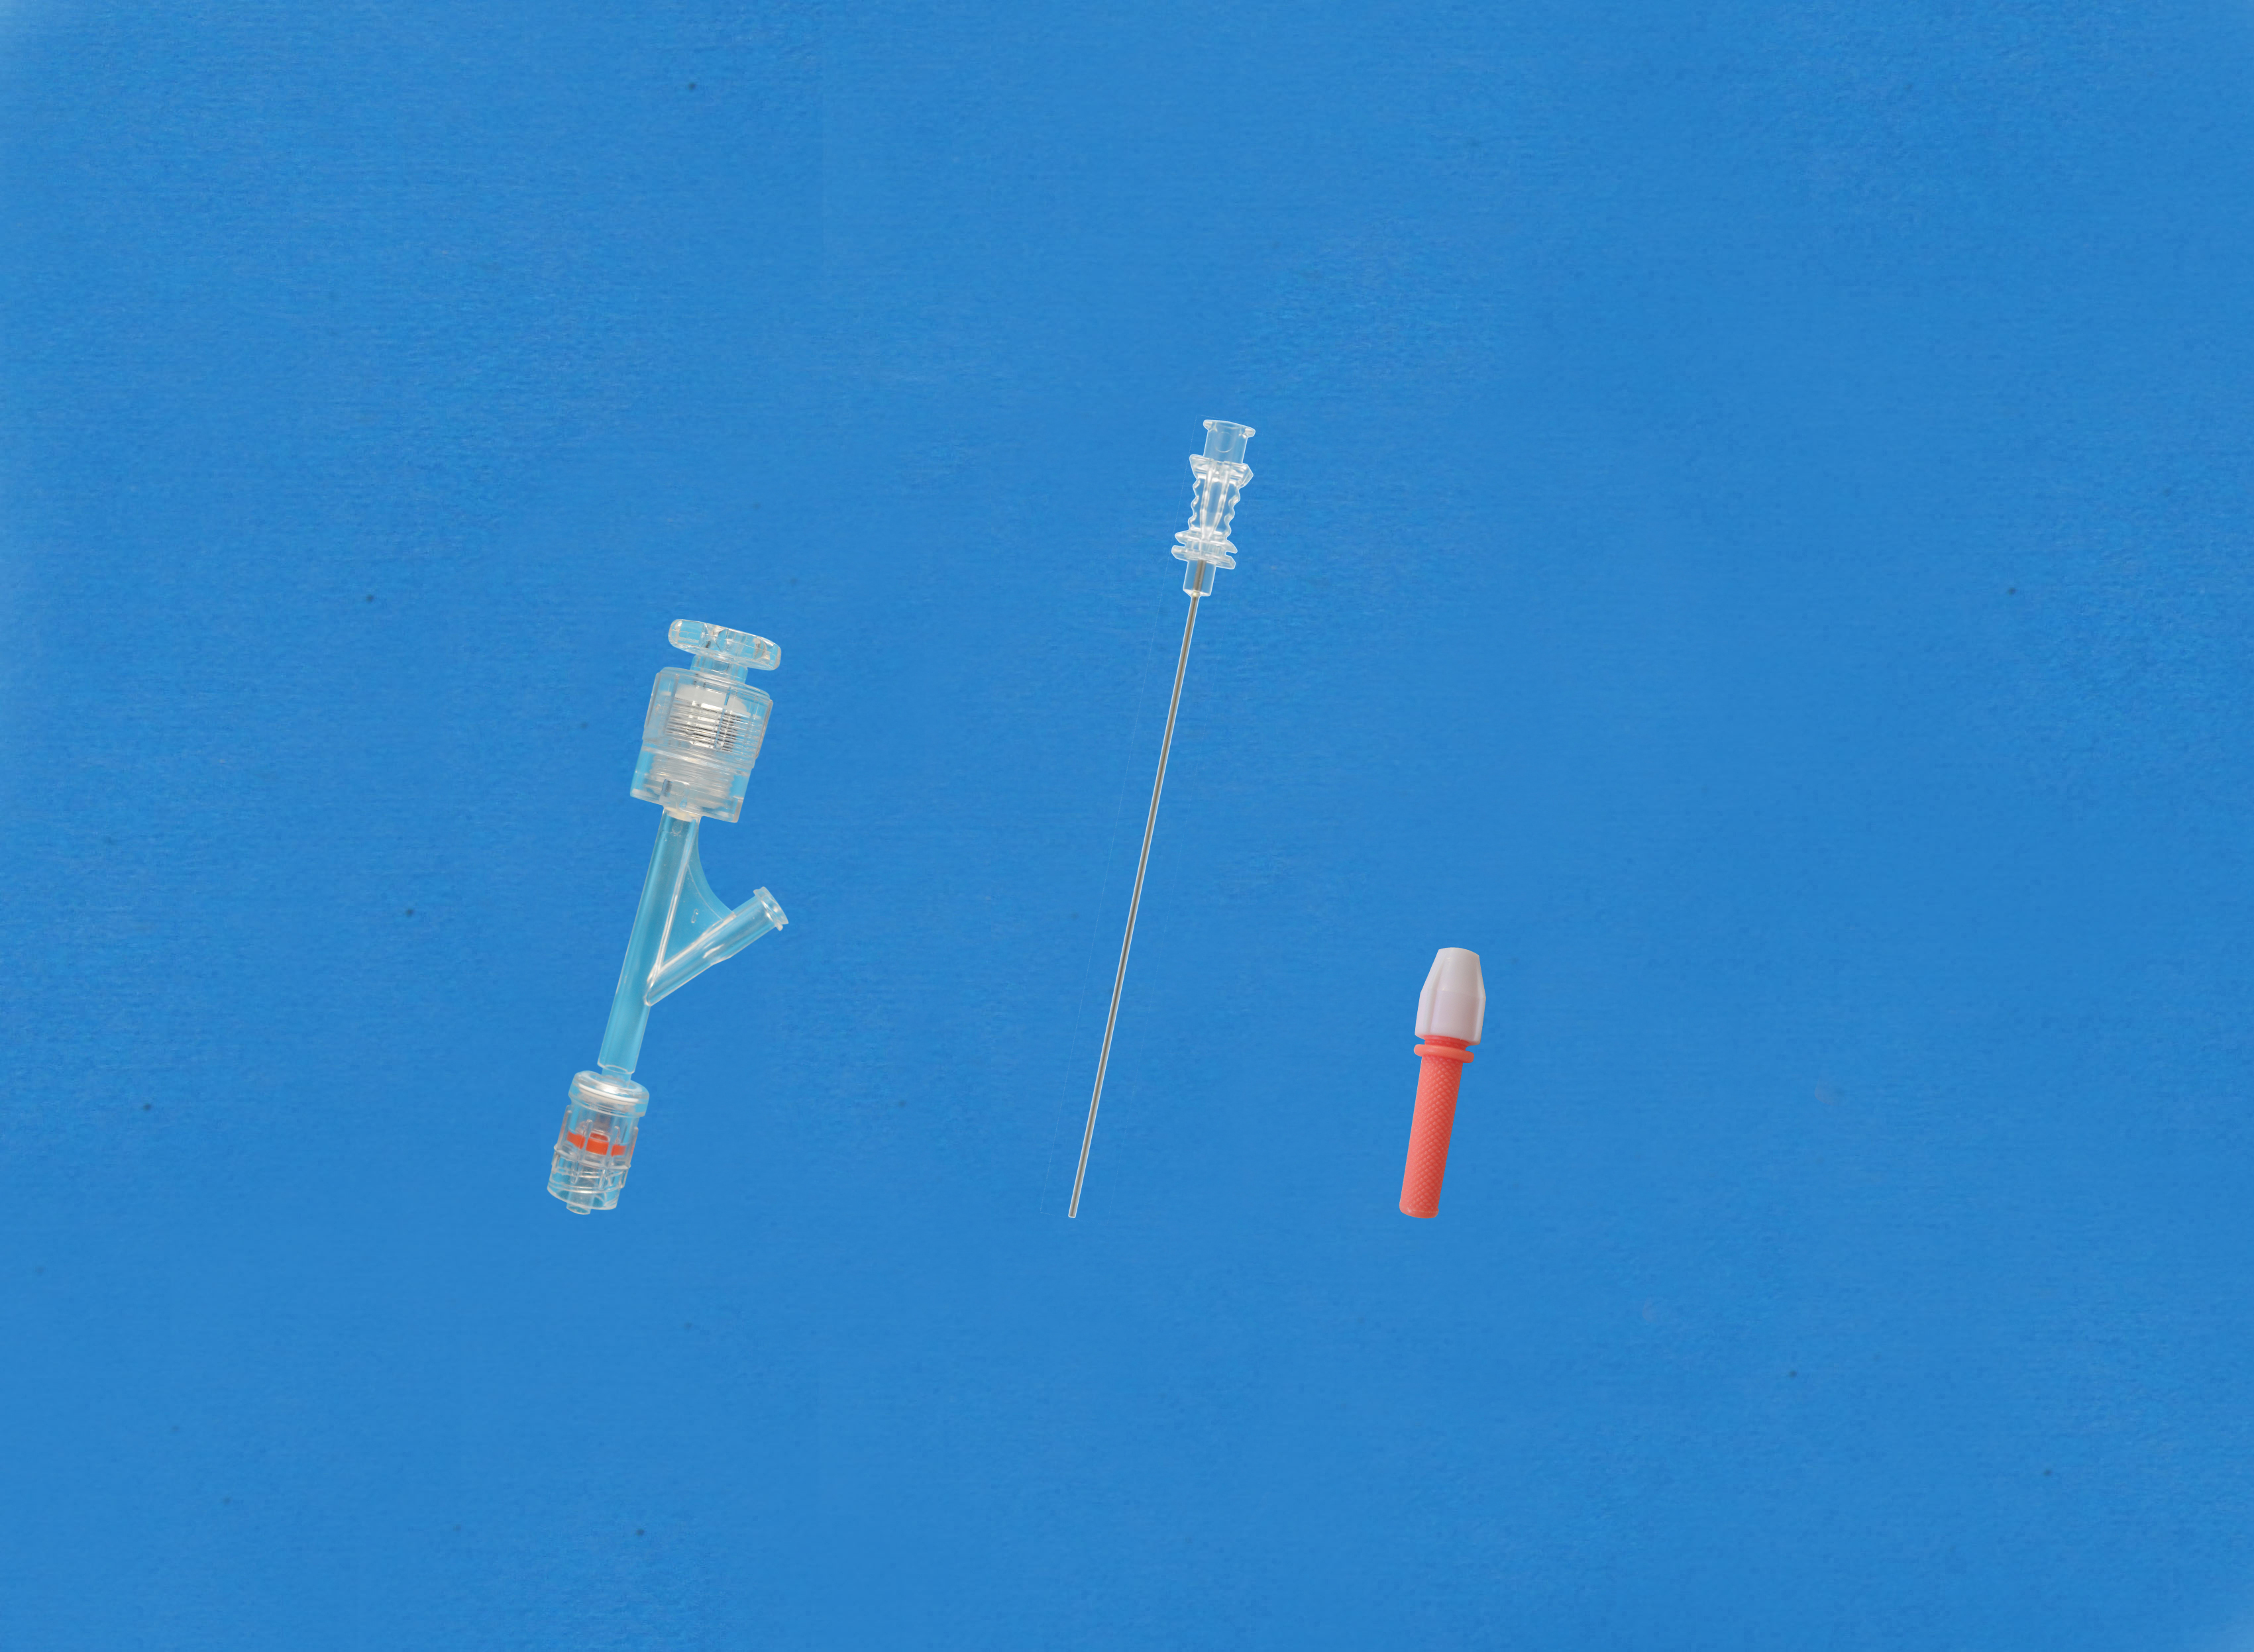 Haemostatic valves, Push-screw, Sideon Female Luer, Insertion Tool with Large Hub, Red/Copper Torquer